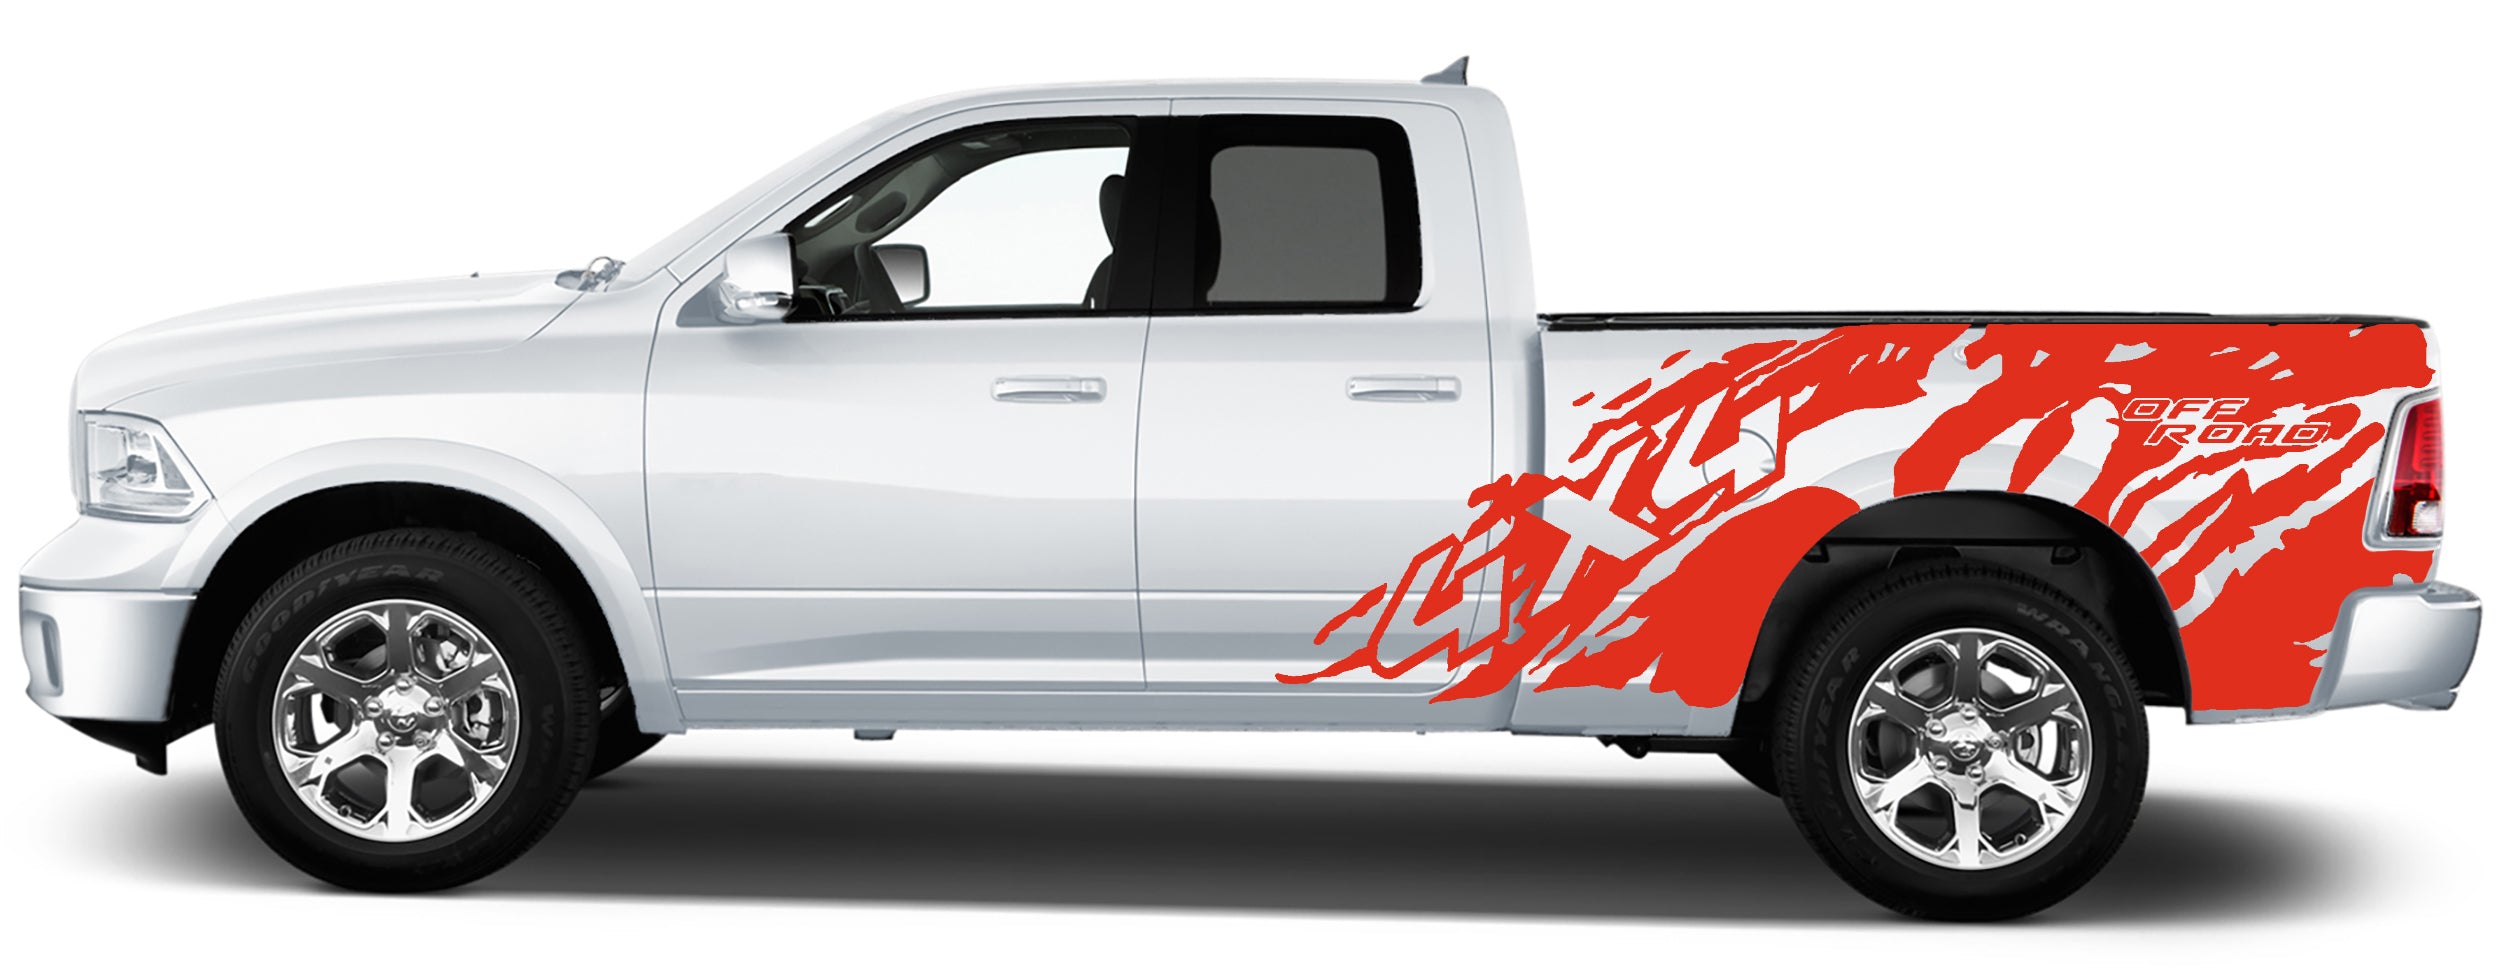 4x4 off road side graphics for dodge ram 2009 to 2018 models red